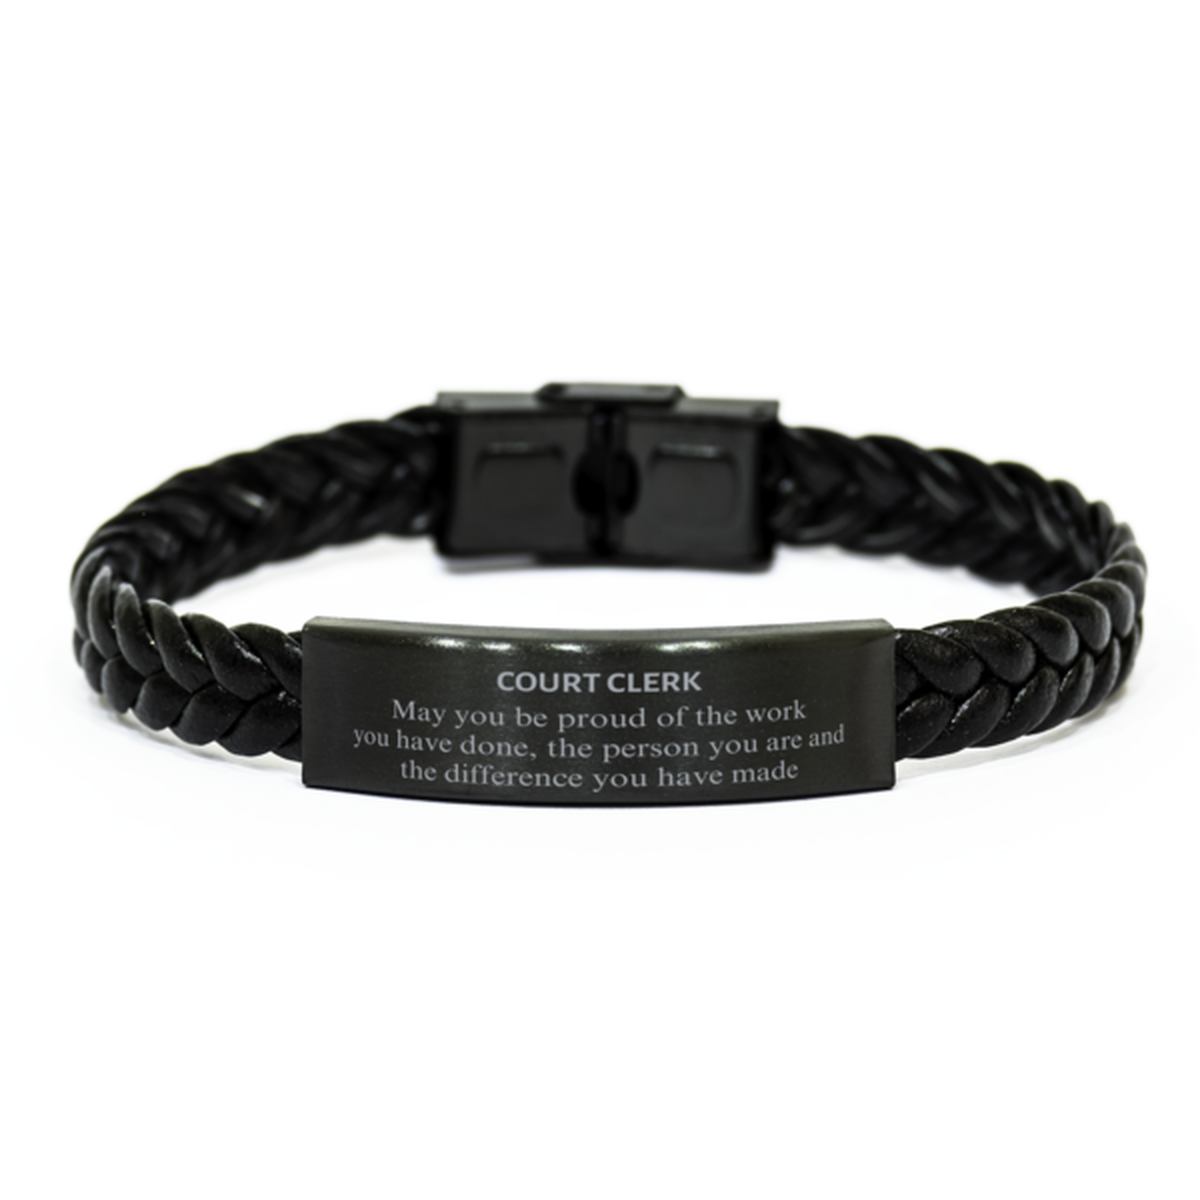 Court Clerk May you be proud of the work you have done, Retirement Court Clerk Braided Leather Bracelet for Colleague Appreciation Gifts Amazing for Court Clerk